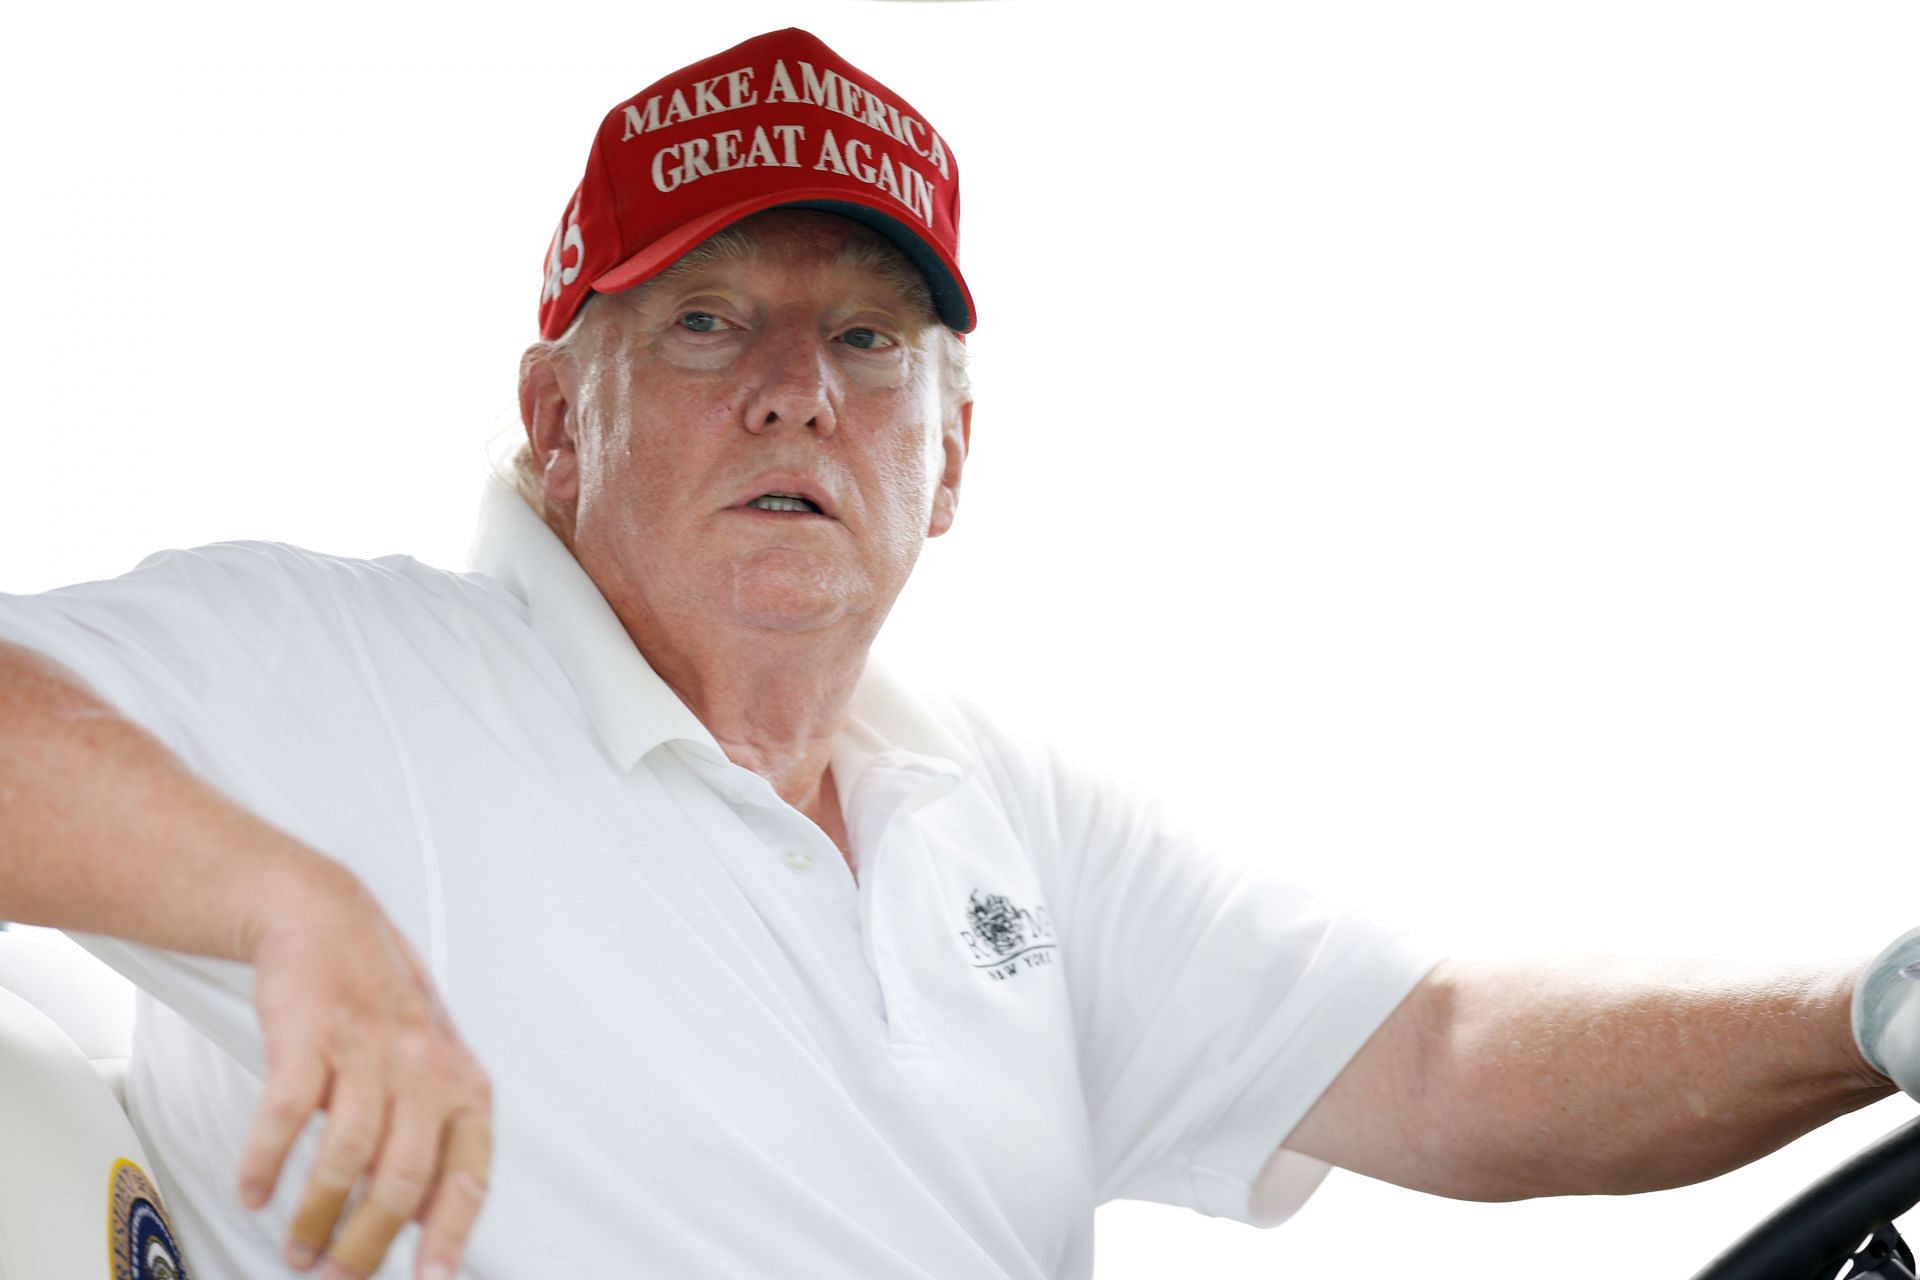 Former U.S. President Donald Trump at Trump National Golf Club in Bedminster, New Jersey.